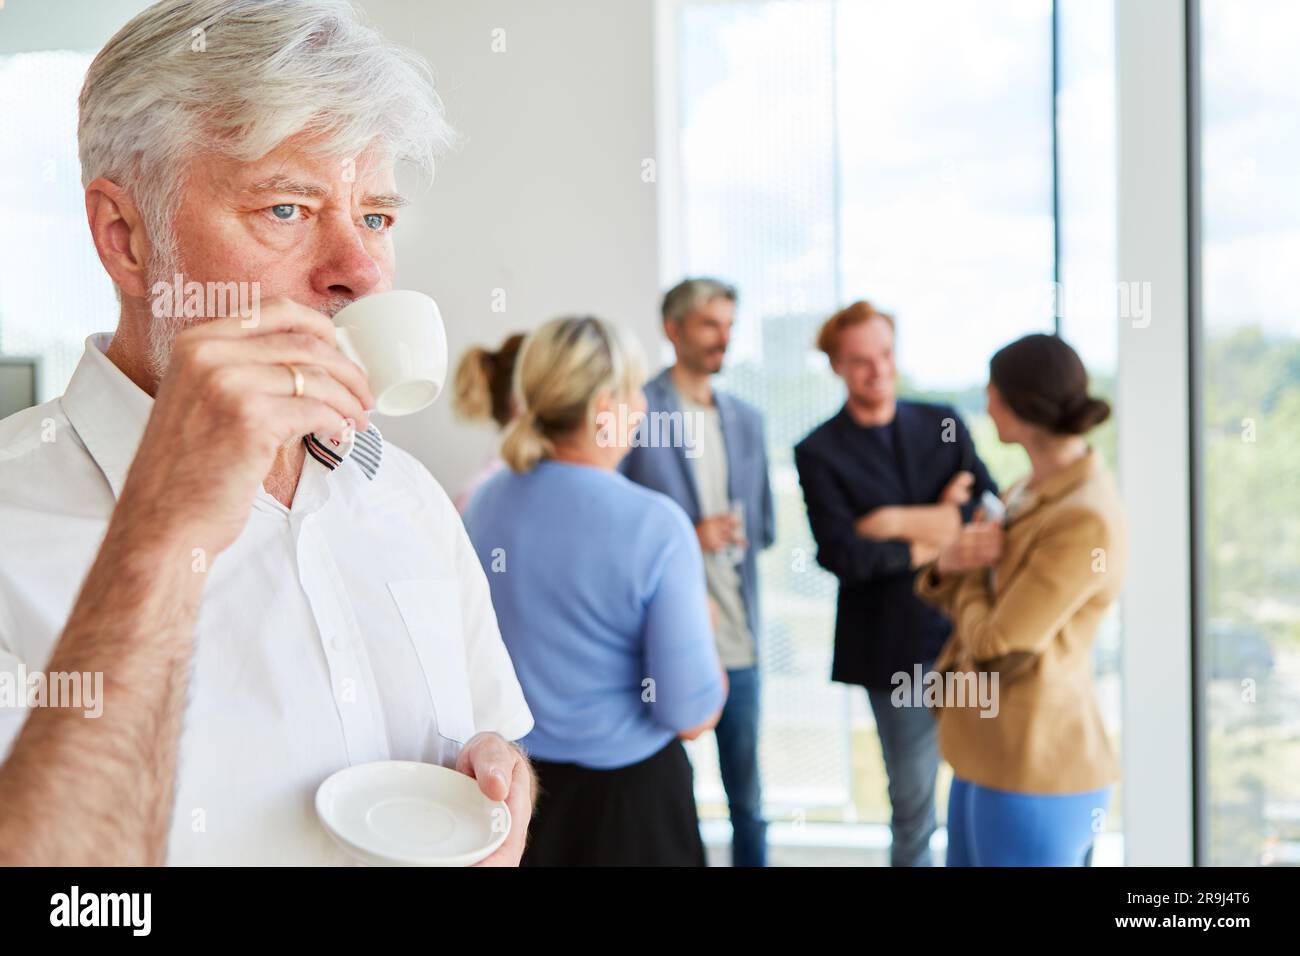 Thoughtful senior businessman with white hair drinking coffee Stock Photo